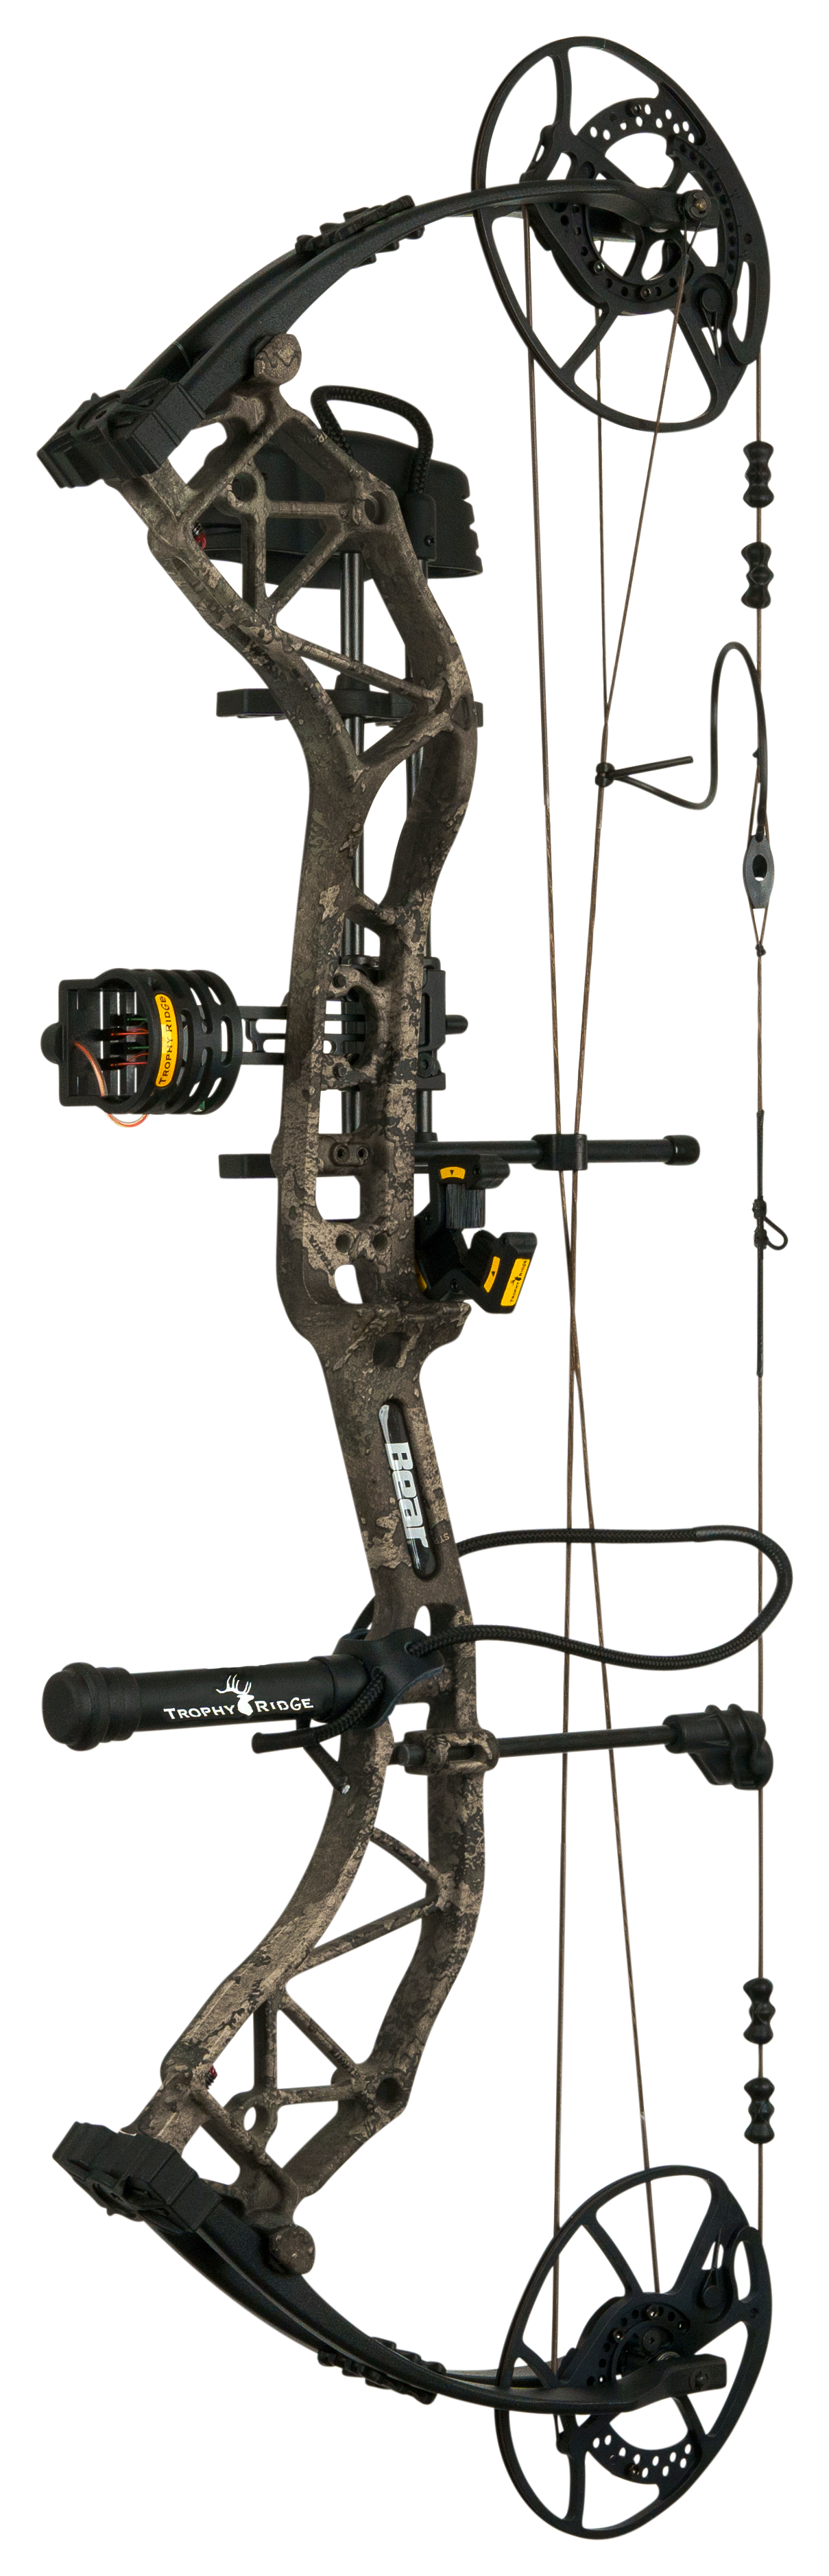 Bear Archery Resurgence RTH Compound Bow Package - TrueTimber Strata - Right Hand - 55-70 lbs